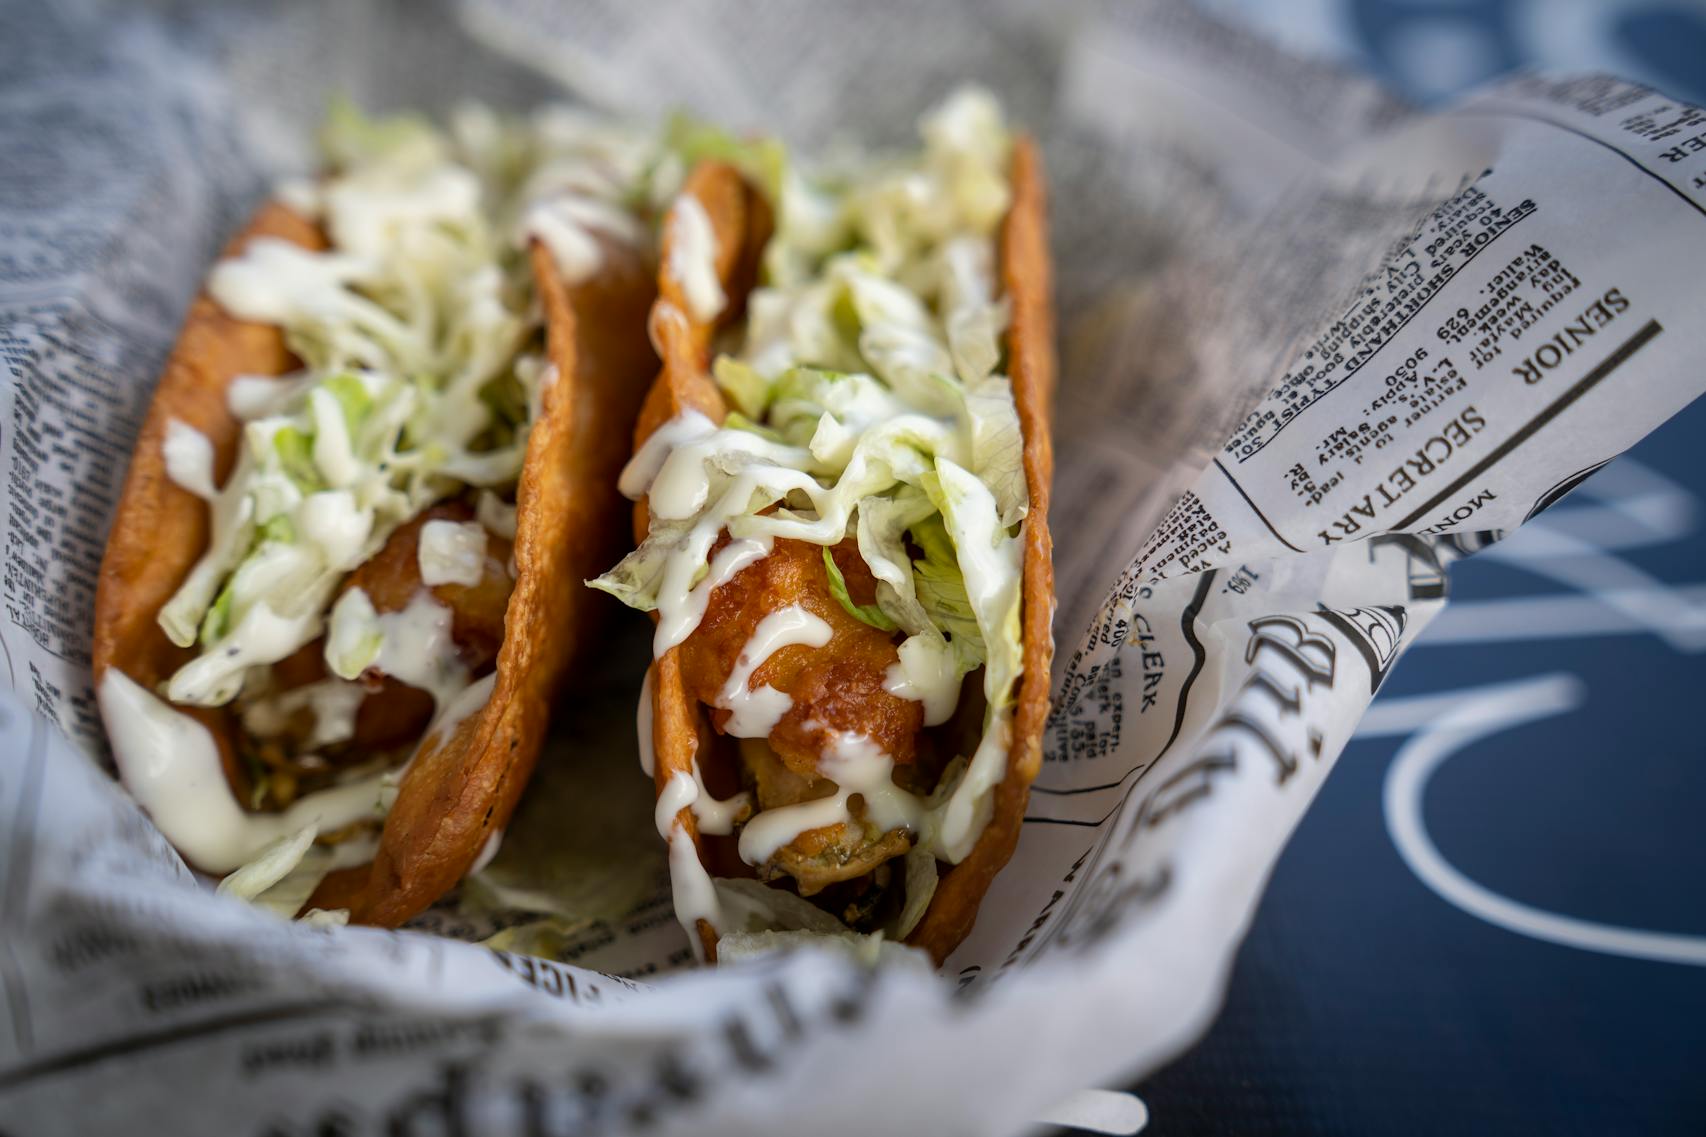 Dill Pickle Cheese Curd Tacos from Richie’s Cheese Curd Tacos. The new foods of the 2023 Minnesota State Fair photographed on the first day of the fair in Falcon Heights, Minn. on Tuesday, Aug. 8, 2023. ] LEILA NAVIDI • leila.navidi@startribune.com